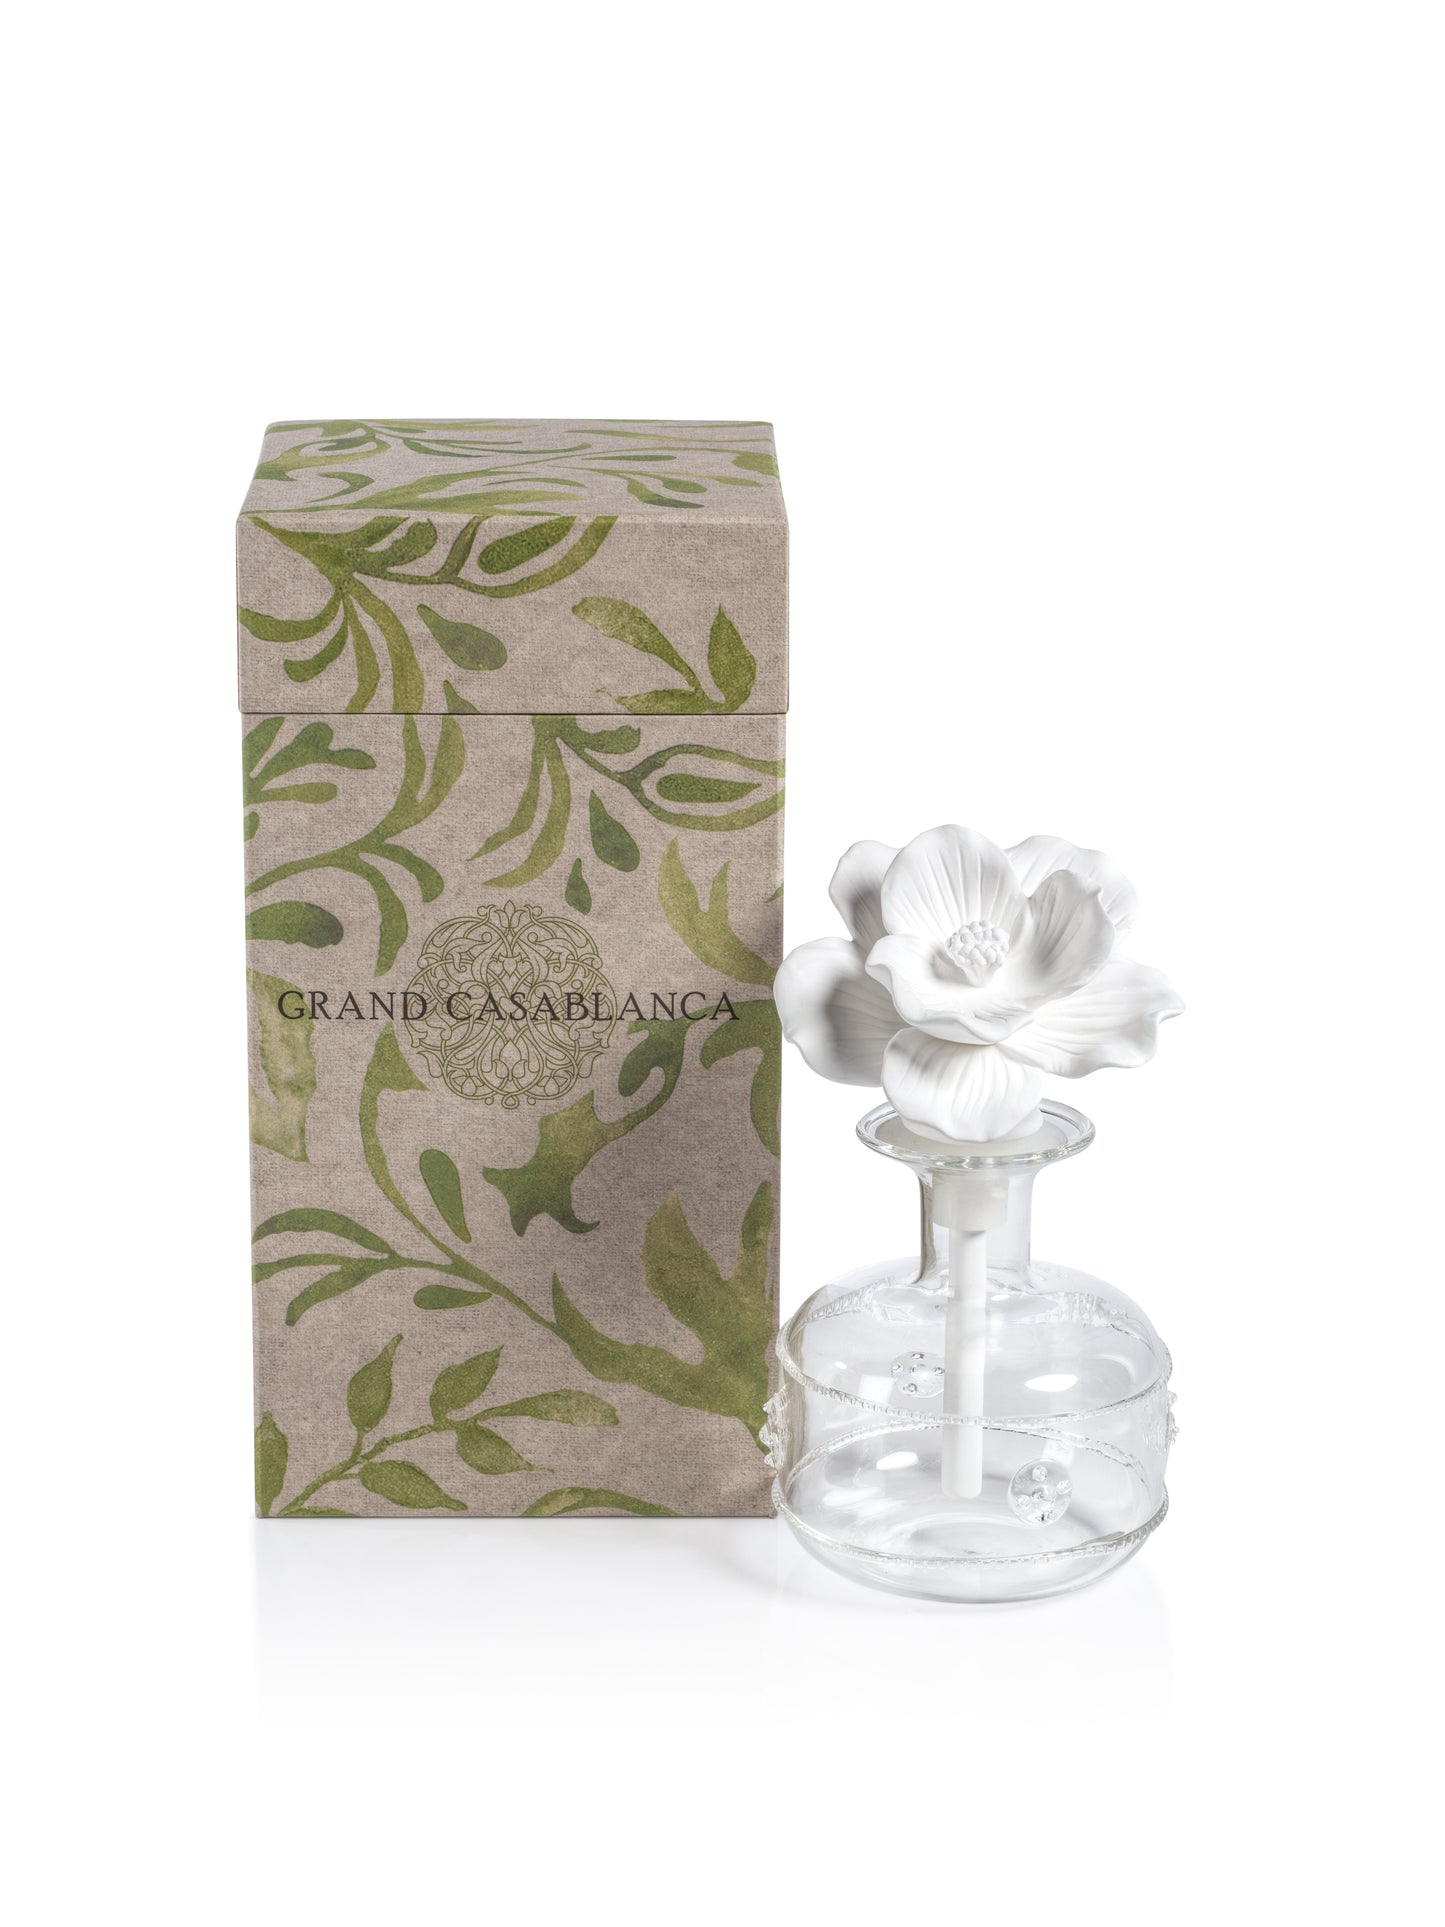 LILY of the VALLEY Zodax Grand Casablanca Porcelain Diffuser